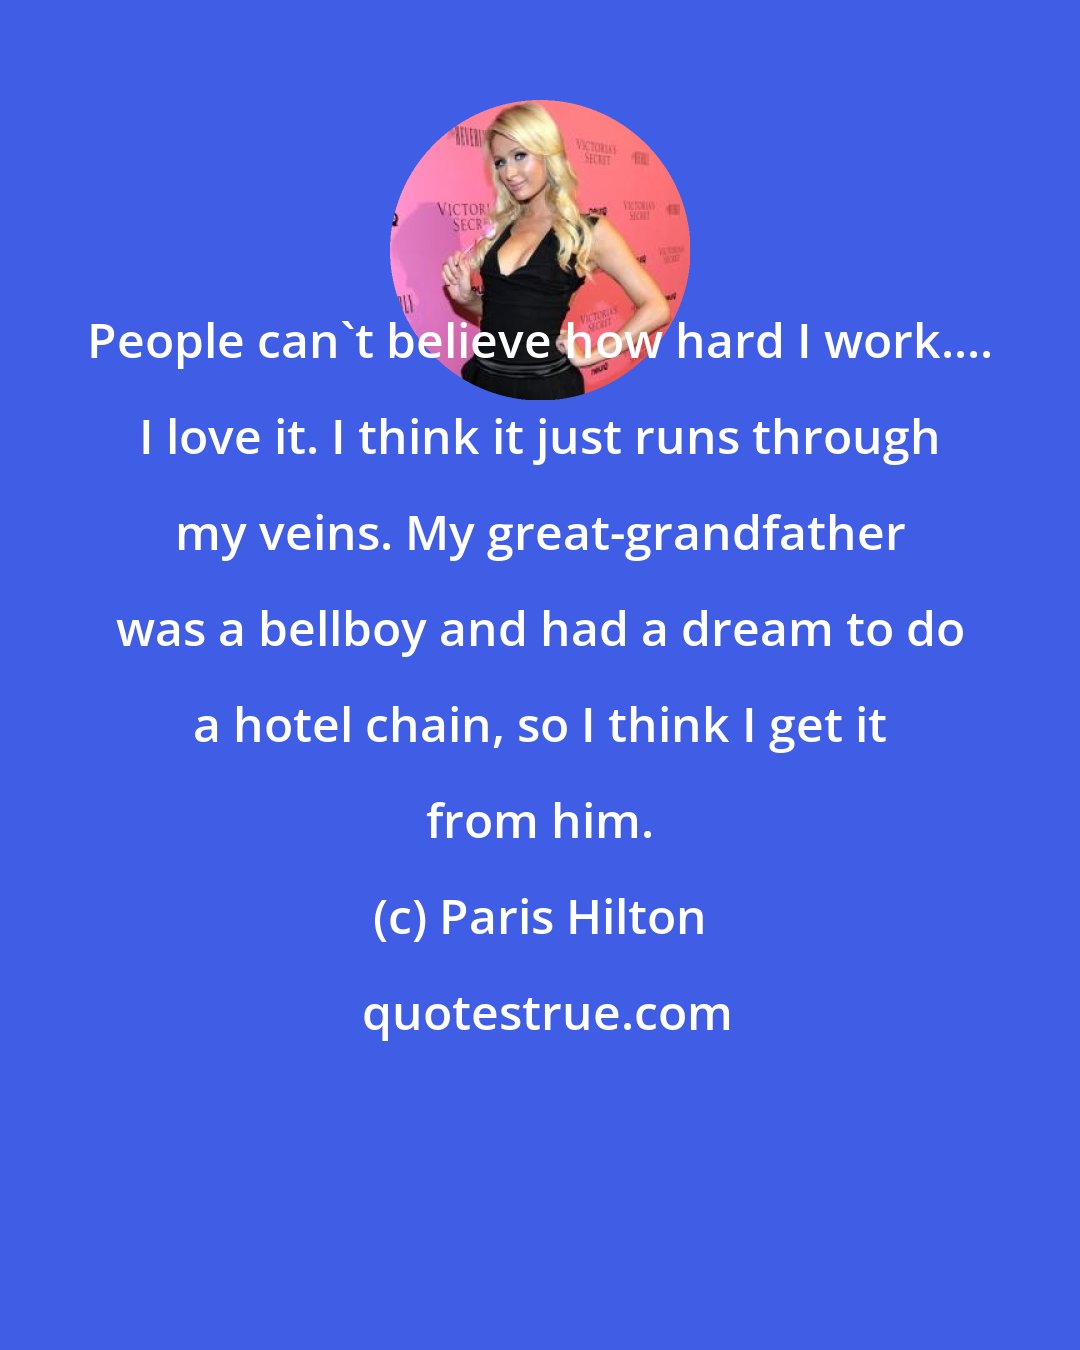 Paris Hilton: People can't believe how hard I work.... I love it. I think it just runs through my veins. My great-grandfather was a bellboy and had a dream to do a hotel chain, so I think I get it from him.